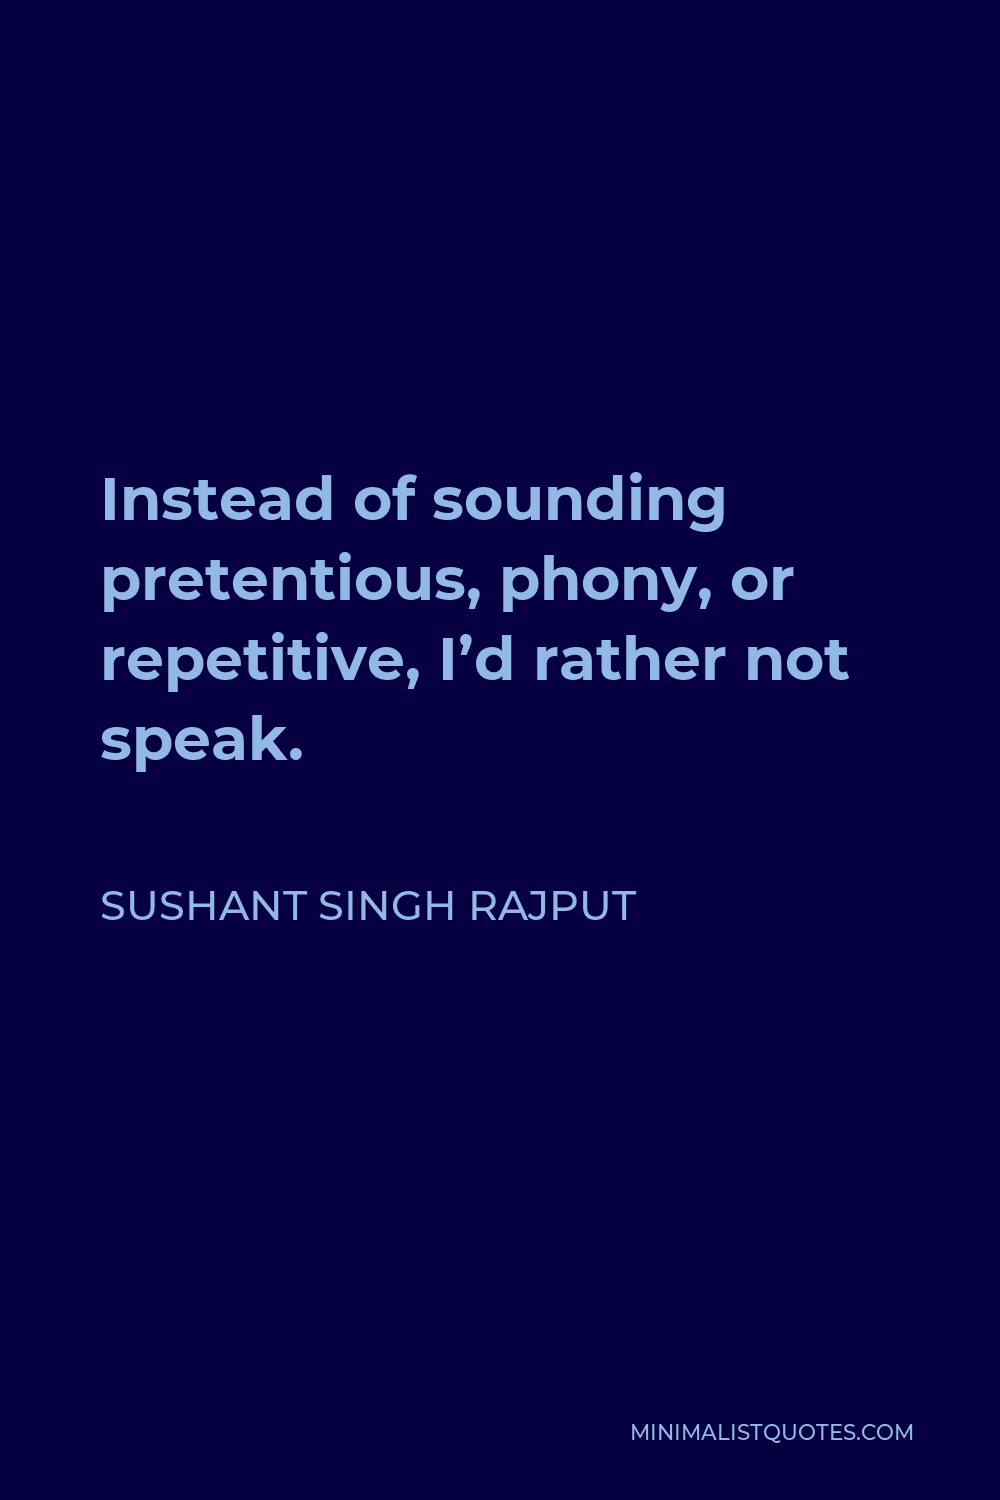 Sushant Singh Rajput Quote - Instead of sounding pretentious, phony, or repetitive, I’d rather not speak.